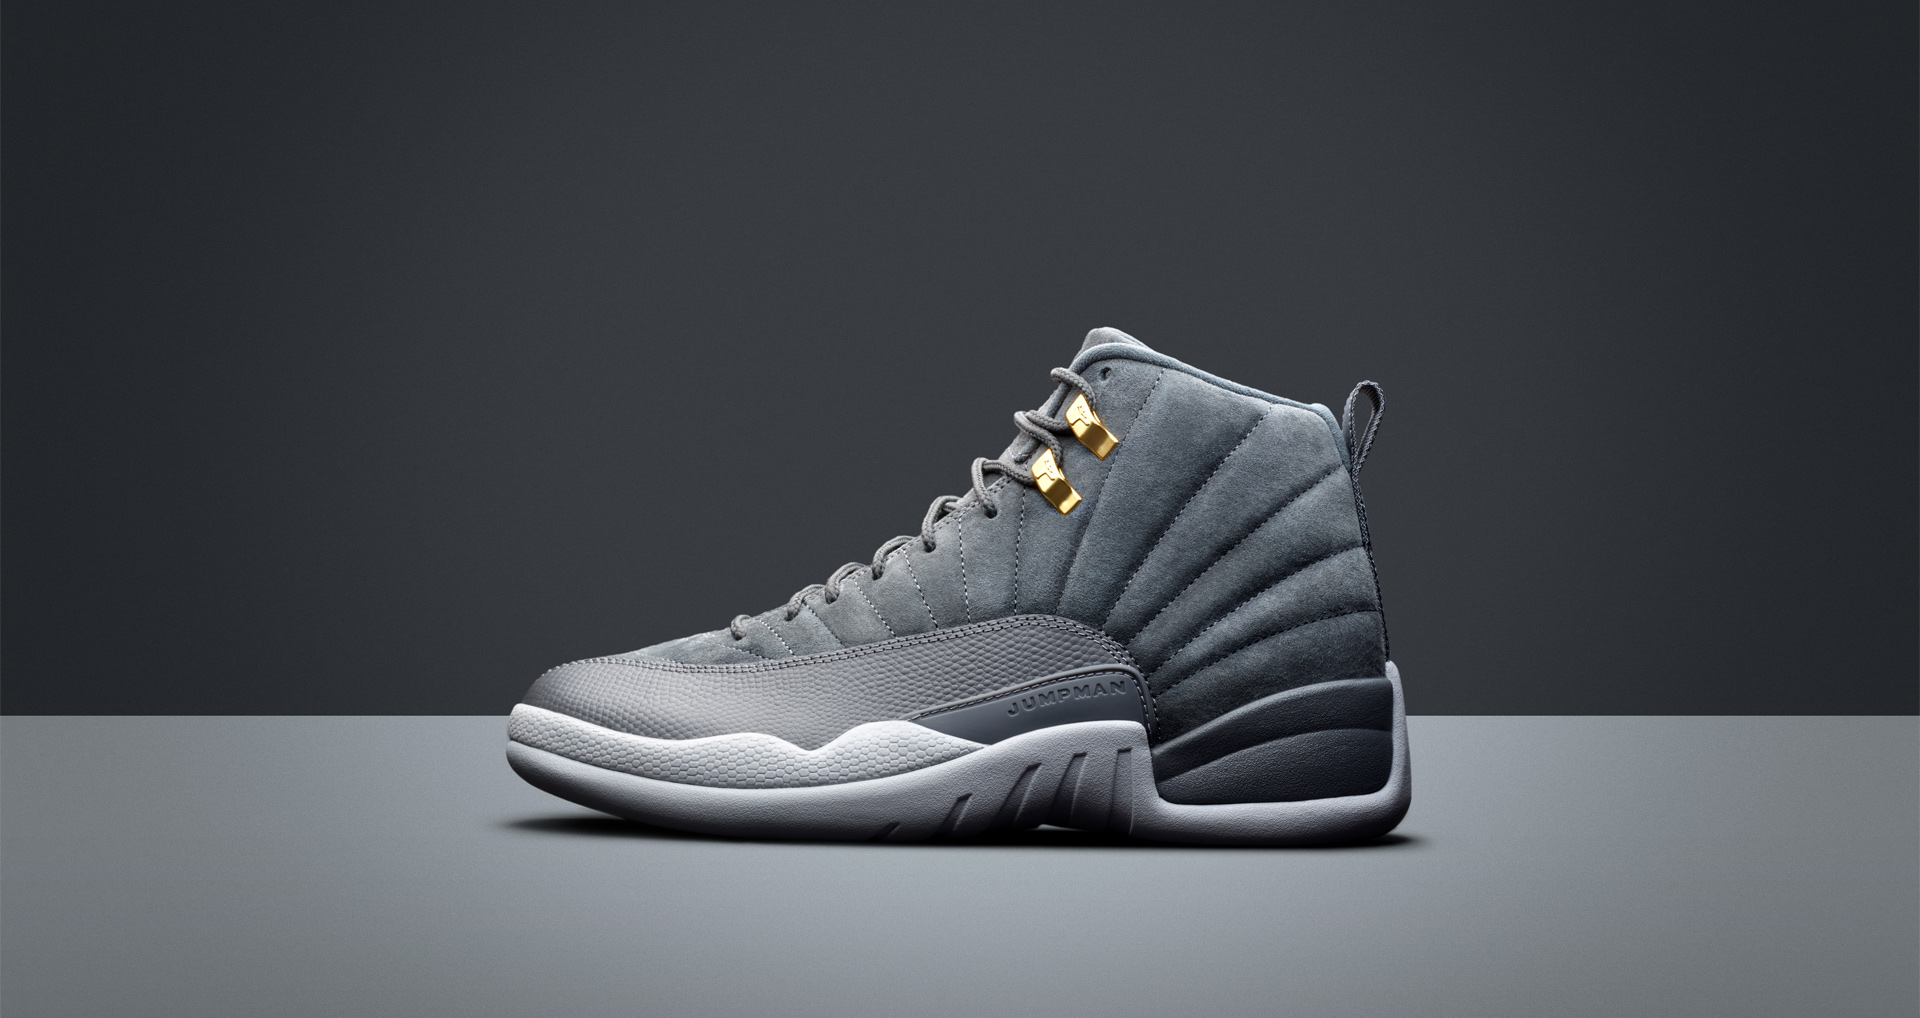 grey and white jordan 12 release date